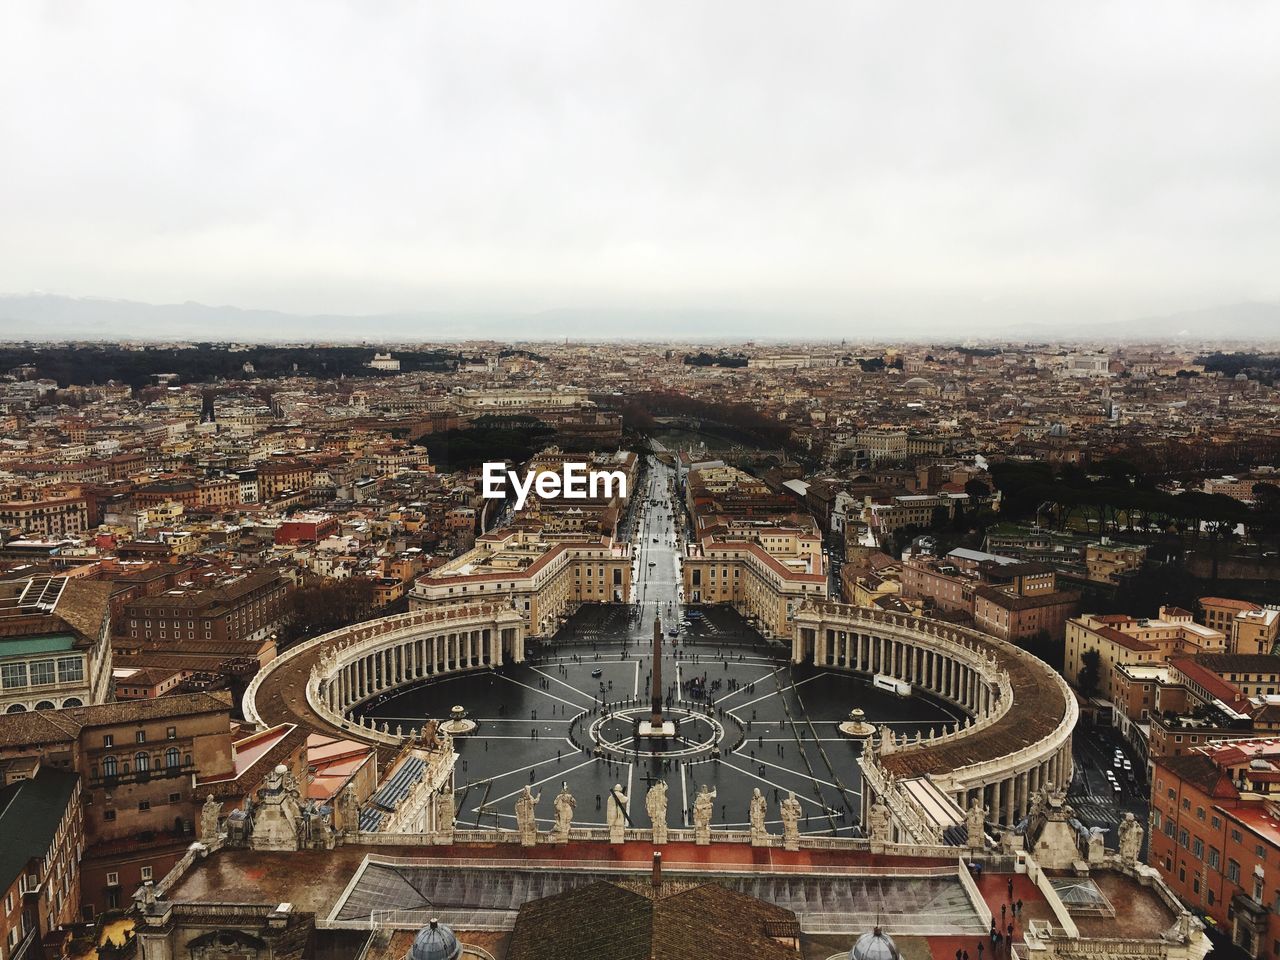 Aerial view of the vatican